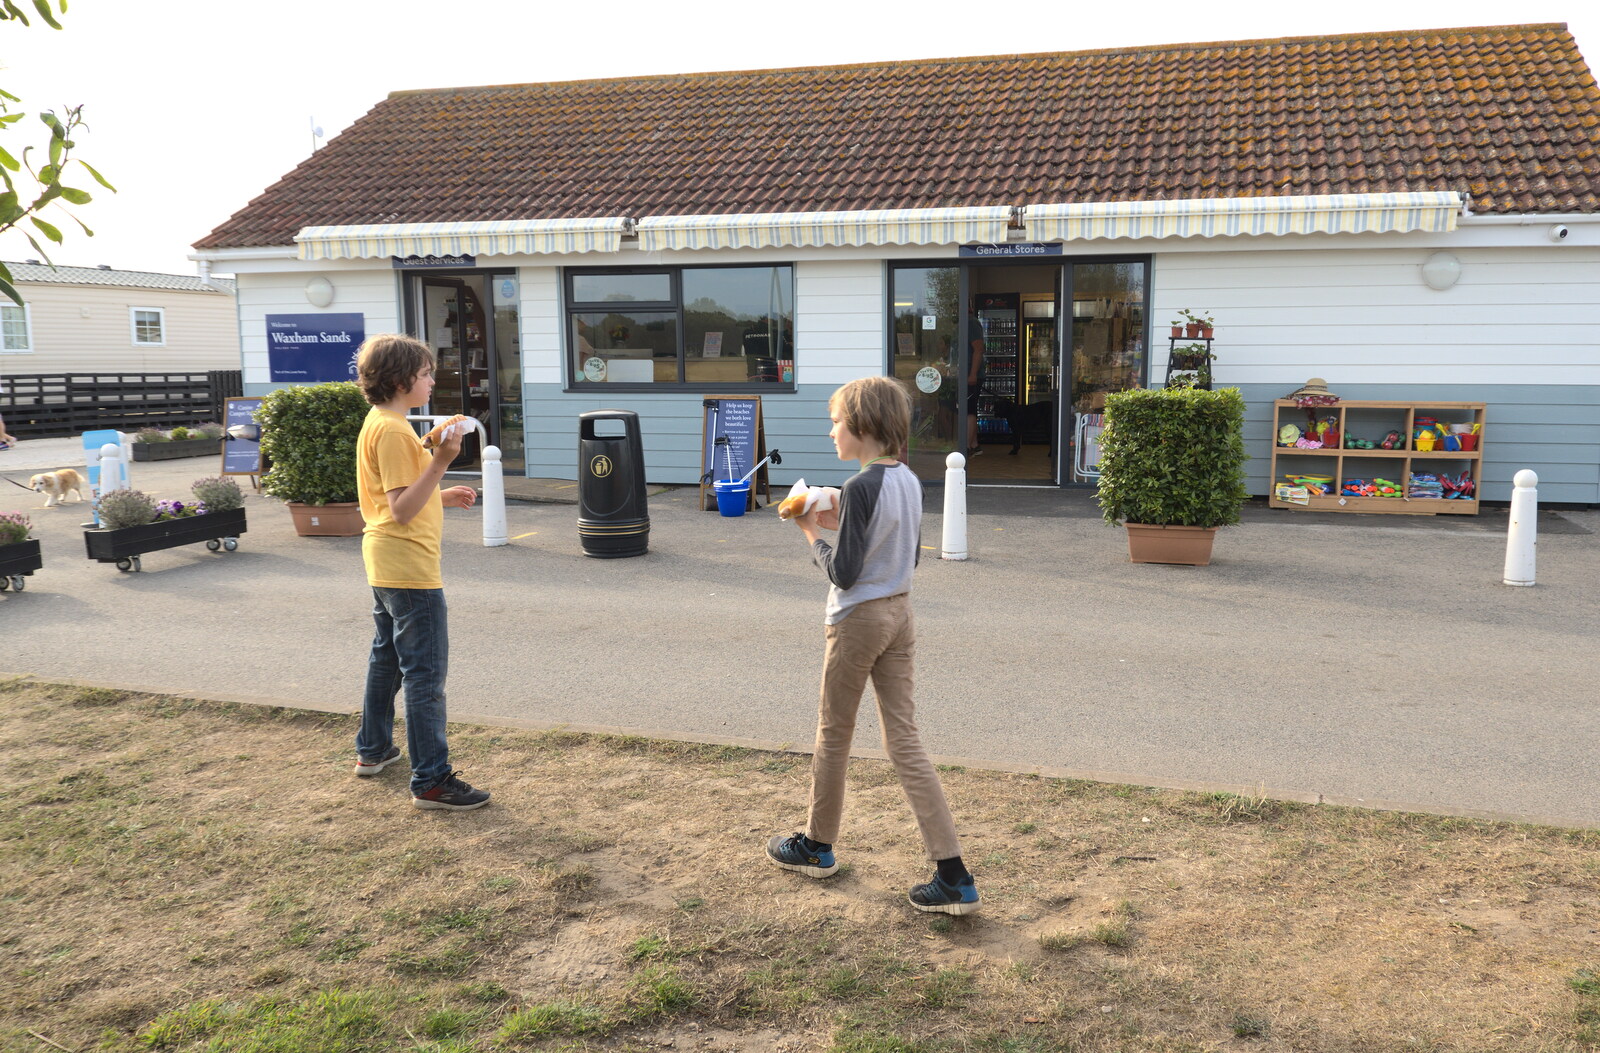 Fred and Harry roam around outside the shop from Camping in the Dunes, Waxham Sands, Norfolk - 9th July 2022